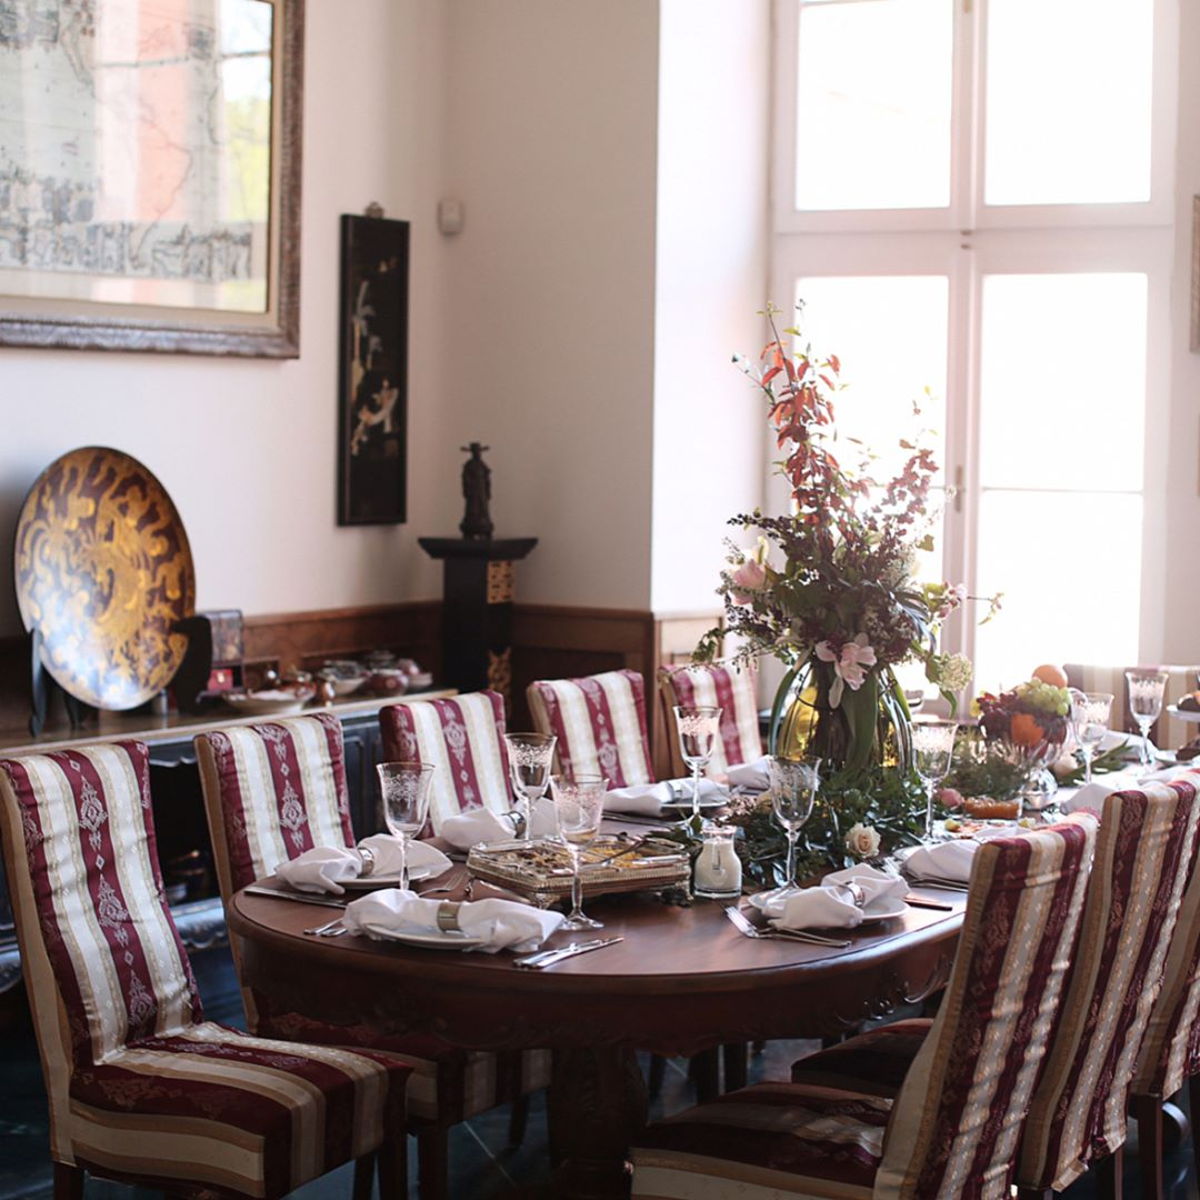 Stylish lunch in the privacy of the Savoia Castle